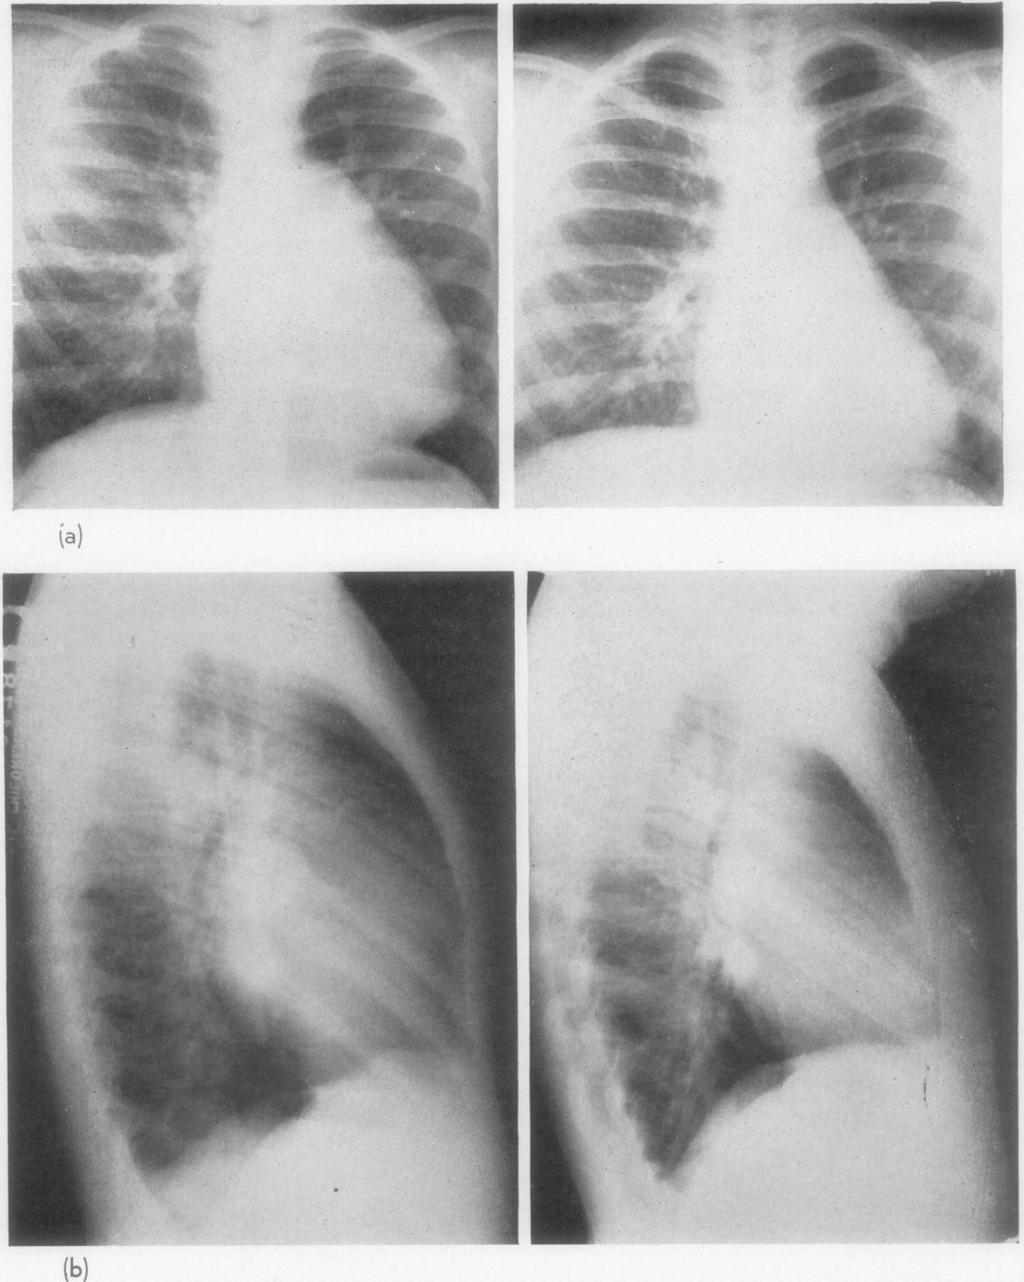 42 A. R. C. Dobell, D. R. Murphy, G. M. Karn, and A. Martinez-Caro allm1 -R.08, Thorax: first published as 10.1136/thx.20.1.40 on 1 January 1965. Downloaded from http://thorax.bmj.com/ FIG. 2.